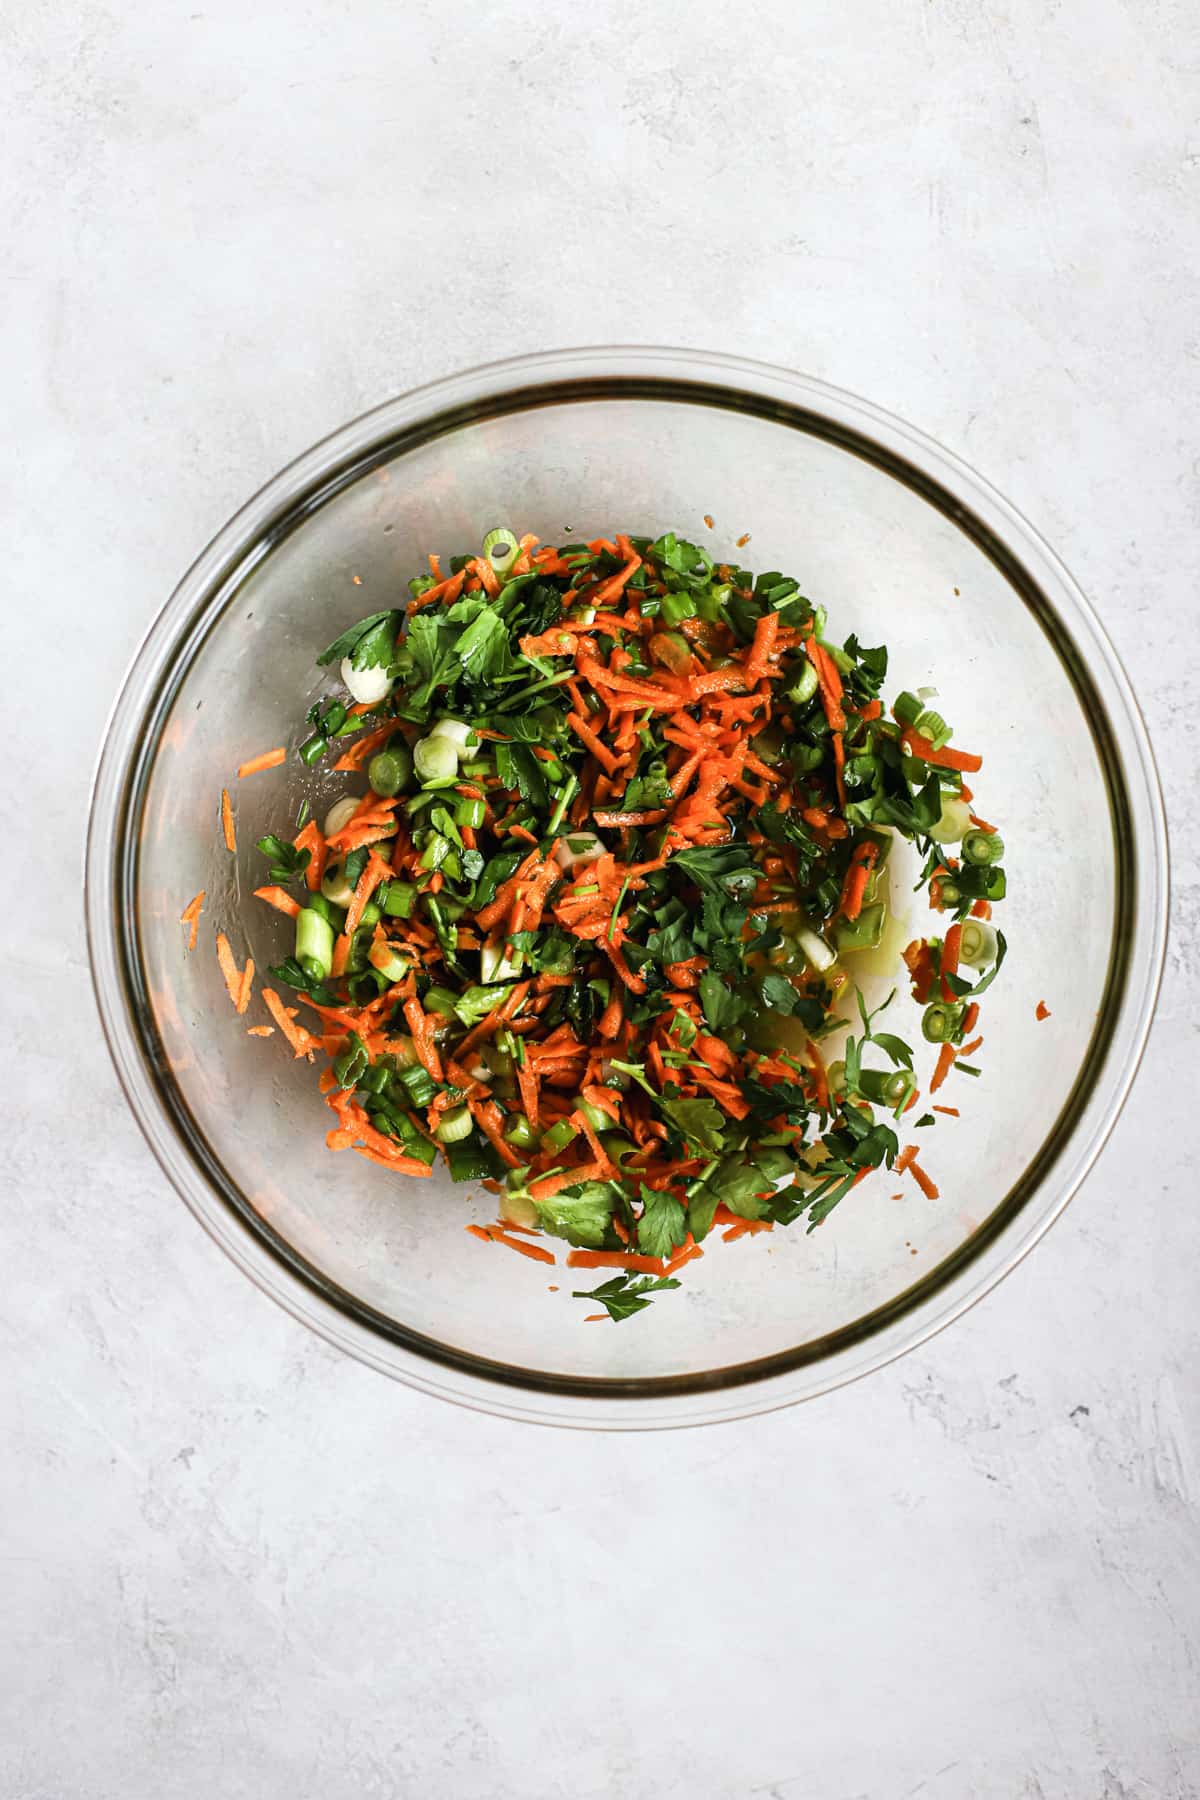 Green onions, carrots, and parsley in coleslaw vinaigrette, in clear glass bowl